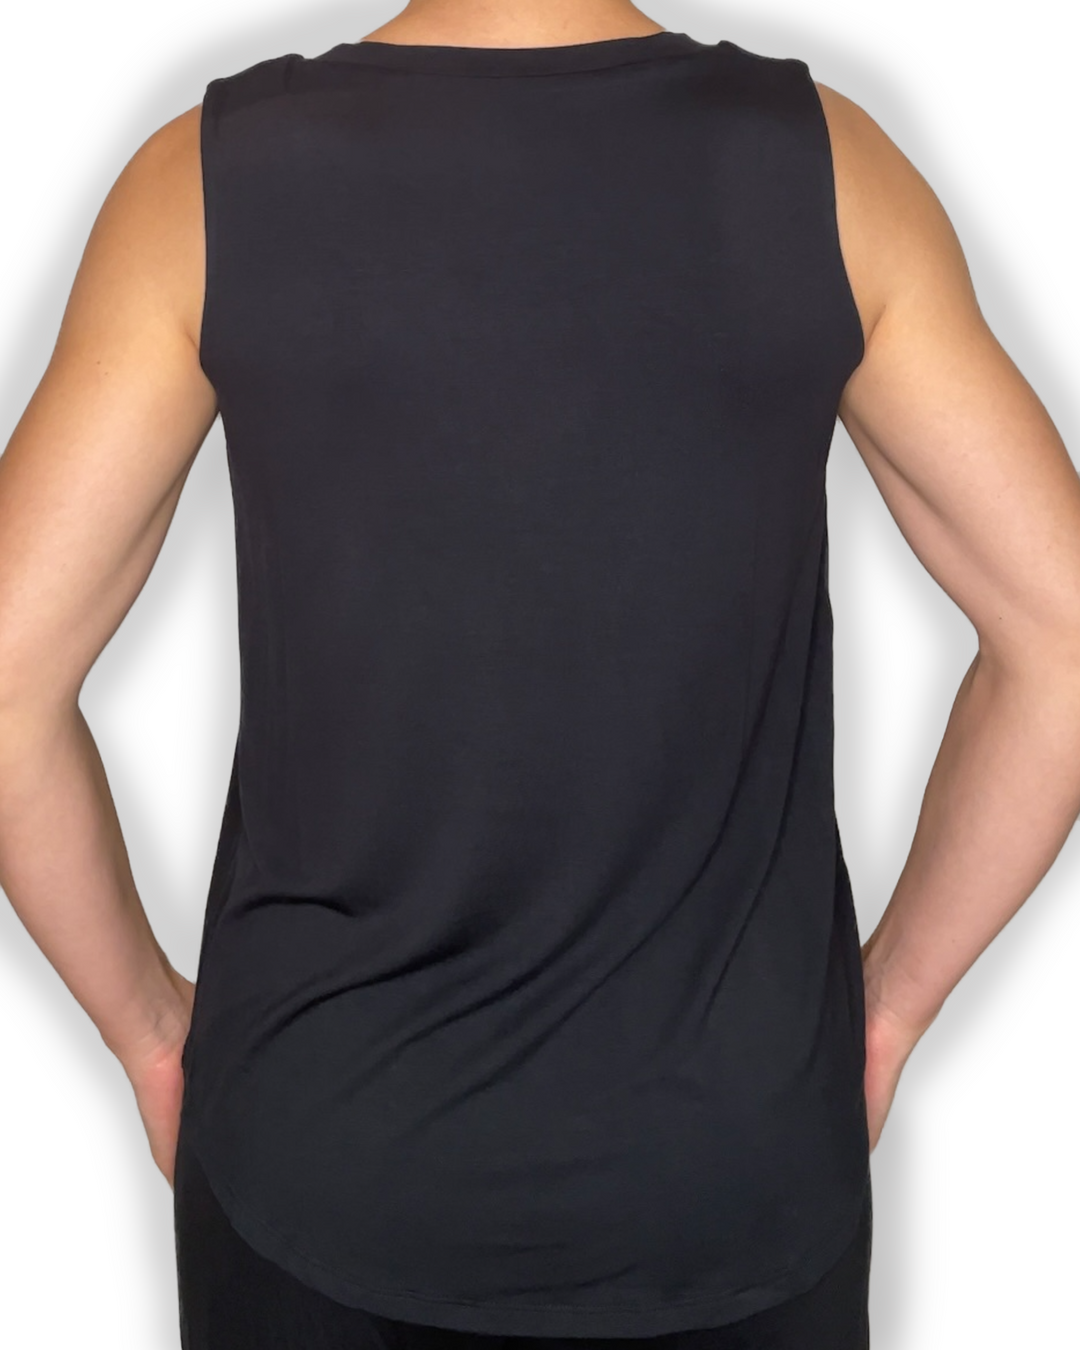 Jia+Kate braless bamboo top in black color Ashley back view